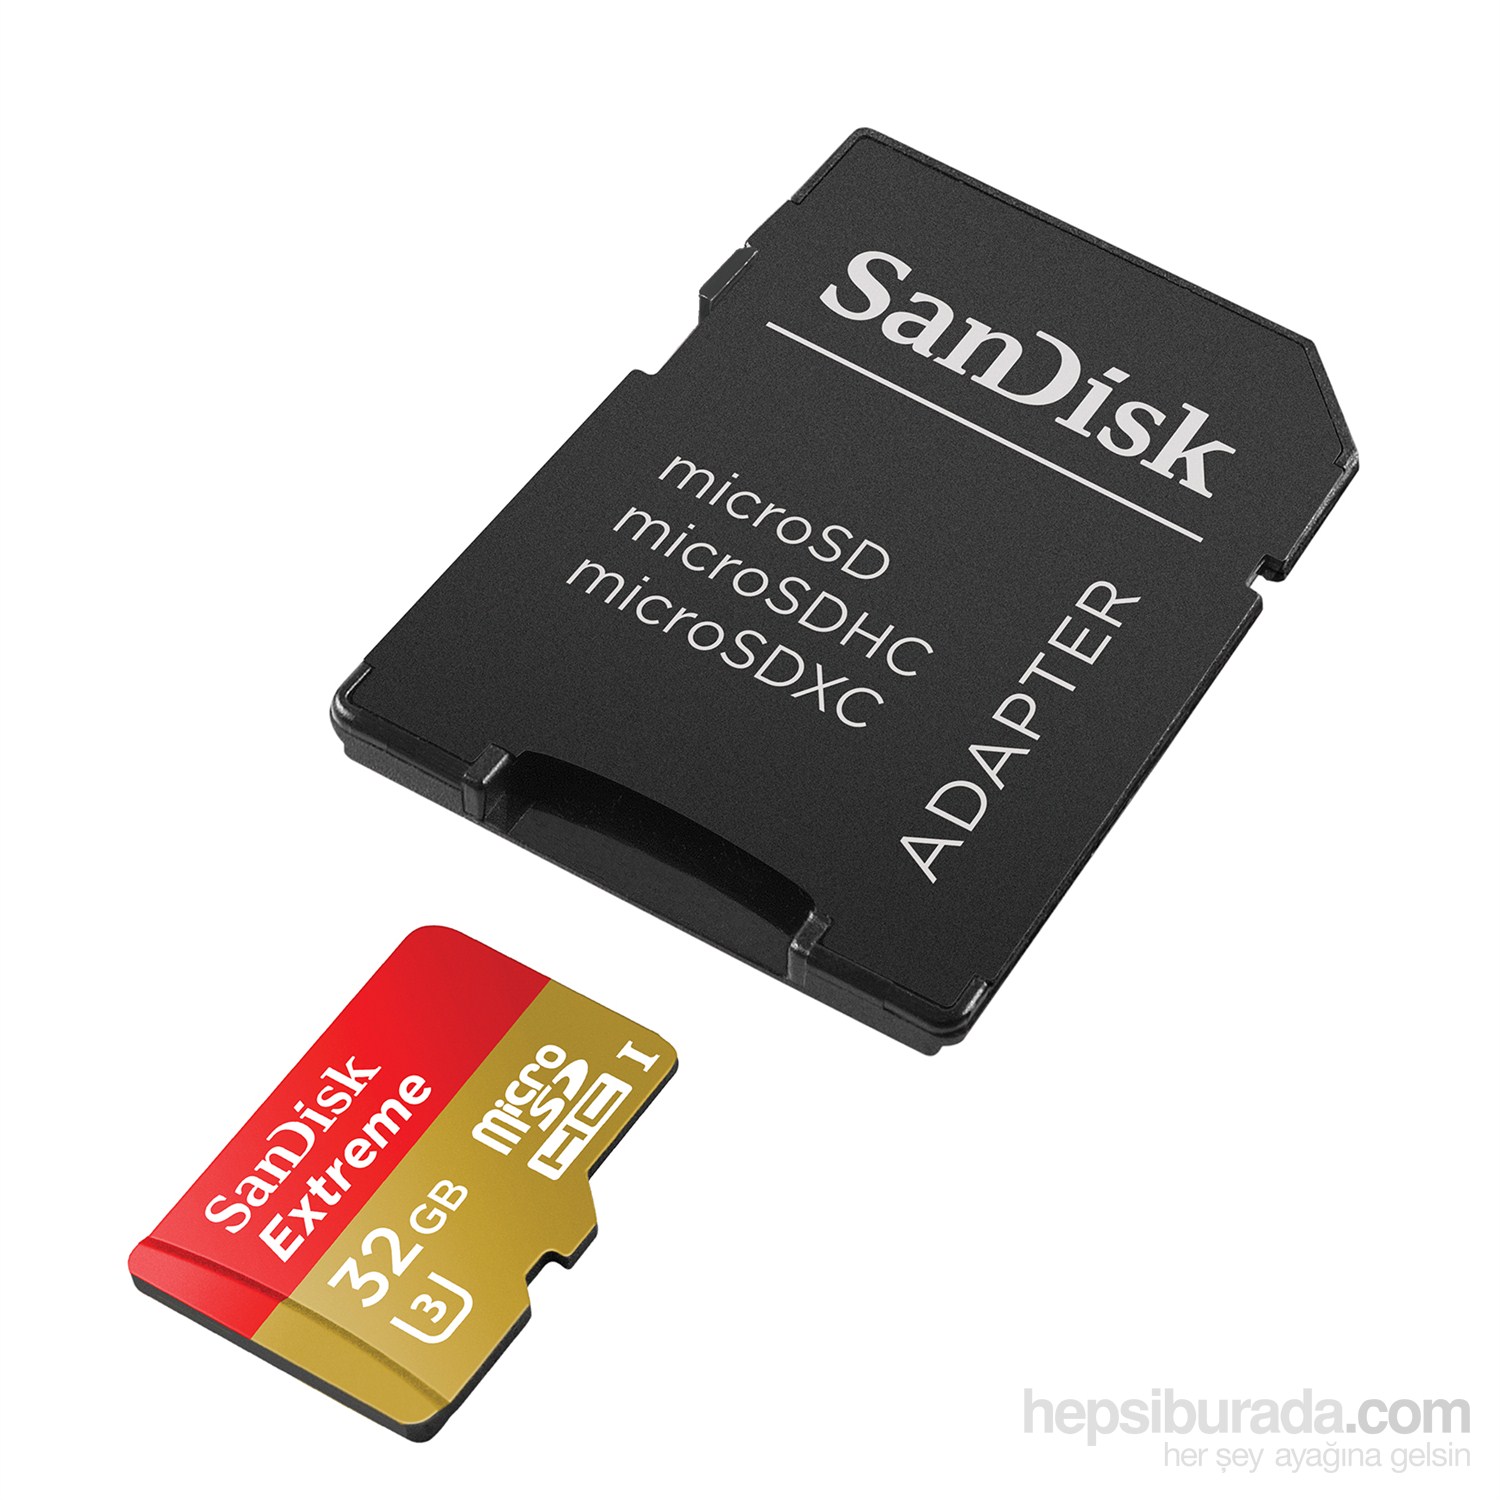 Sandisk Extreme microSDHC 32GB + SD Adapter + Rescue Pro Deluxe 60MB/s Class 10 UHS-I Hafıza Kartı SDSDQXN-032G-G46A